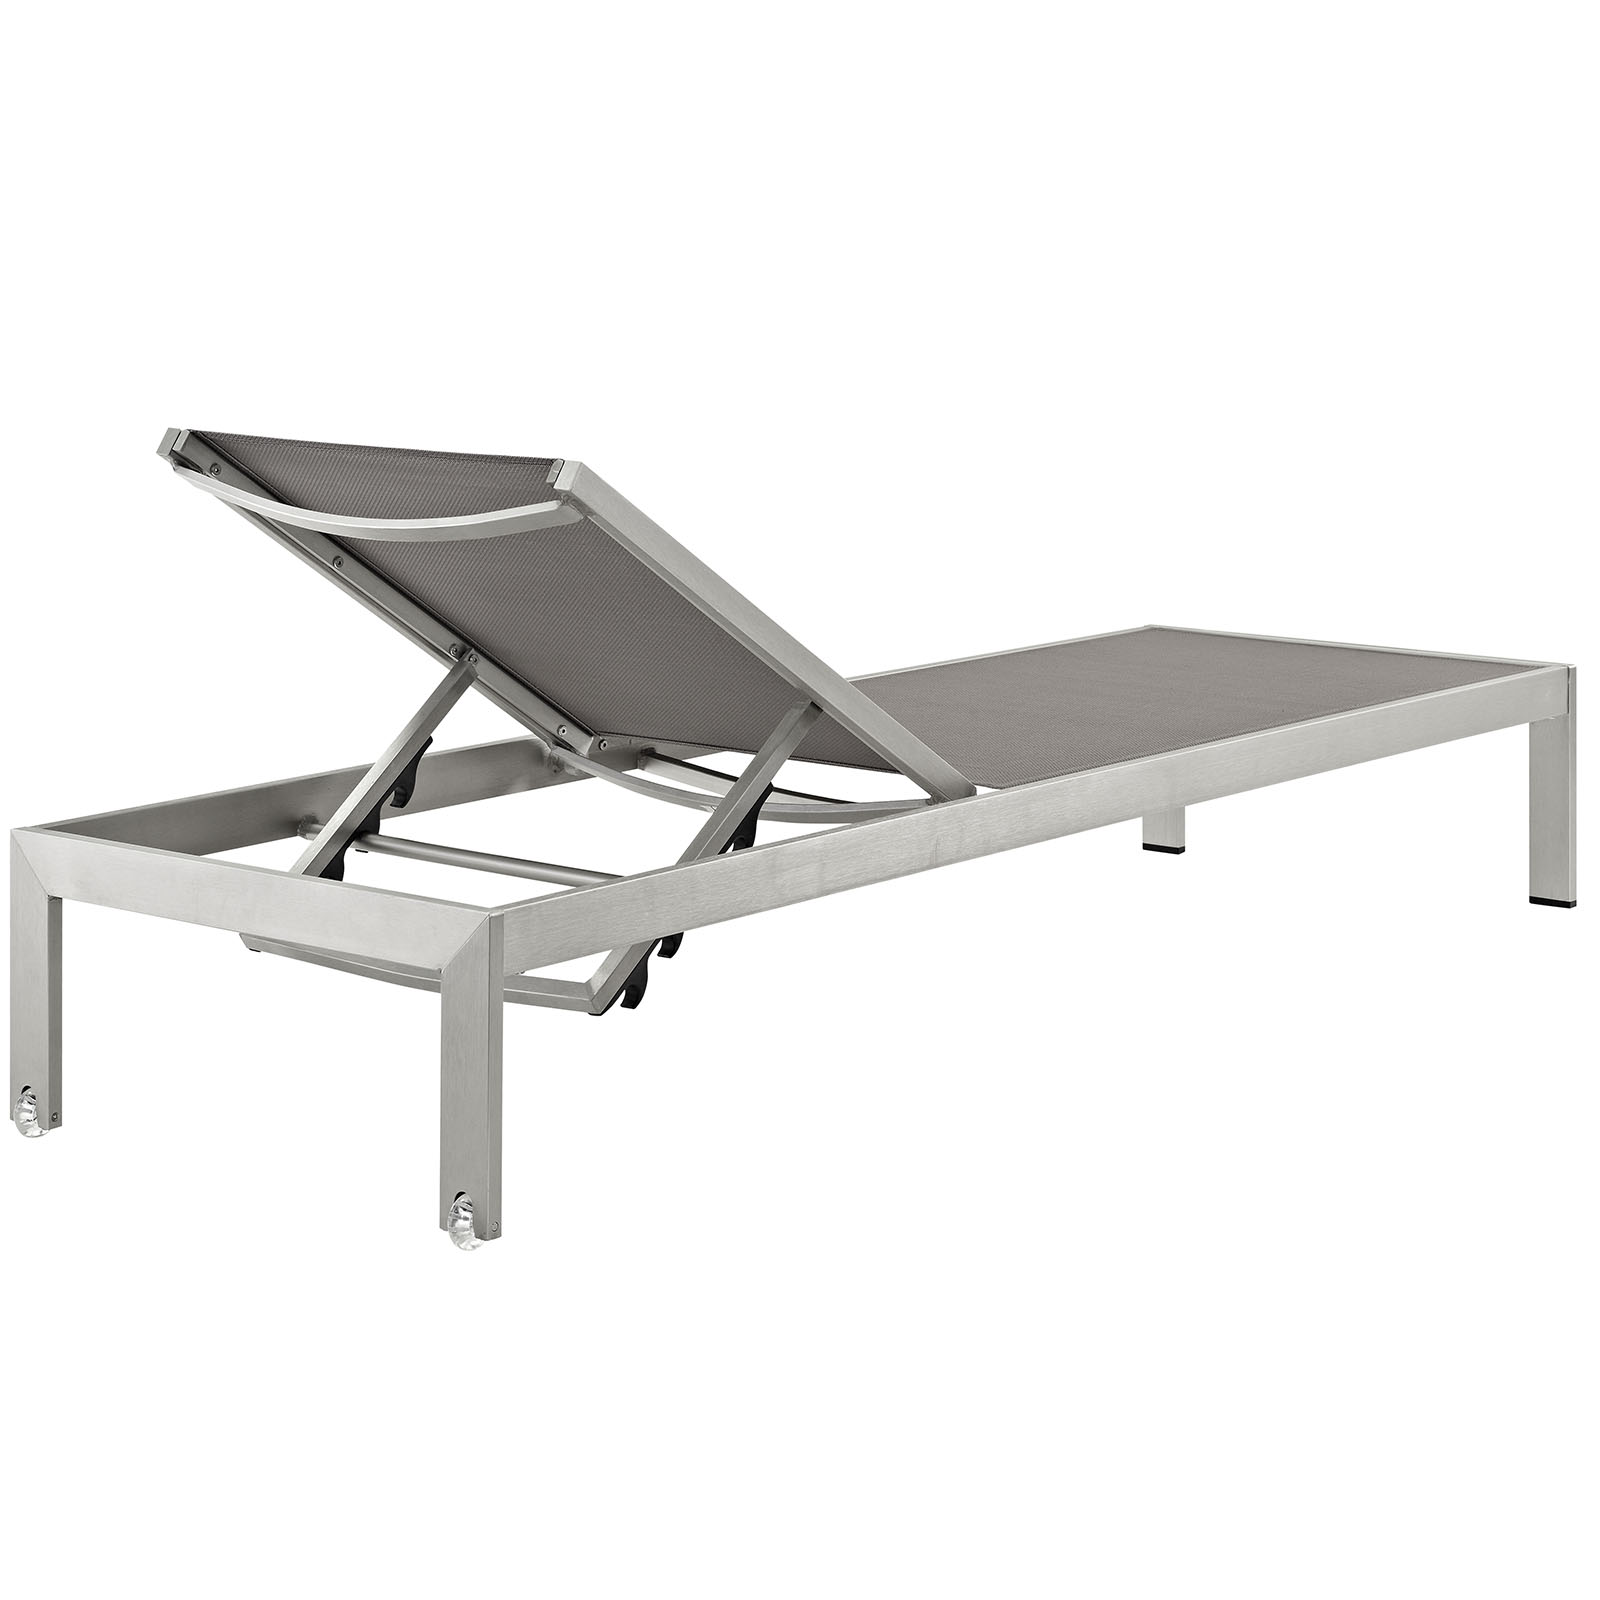 Modern Contemporary Urban Outdoor Patio Balcony Garden Furniture Lounge Chair Chaise and Side Table Set, Aluminum Metal Steel, Grey Gray - image 5 of 7